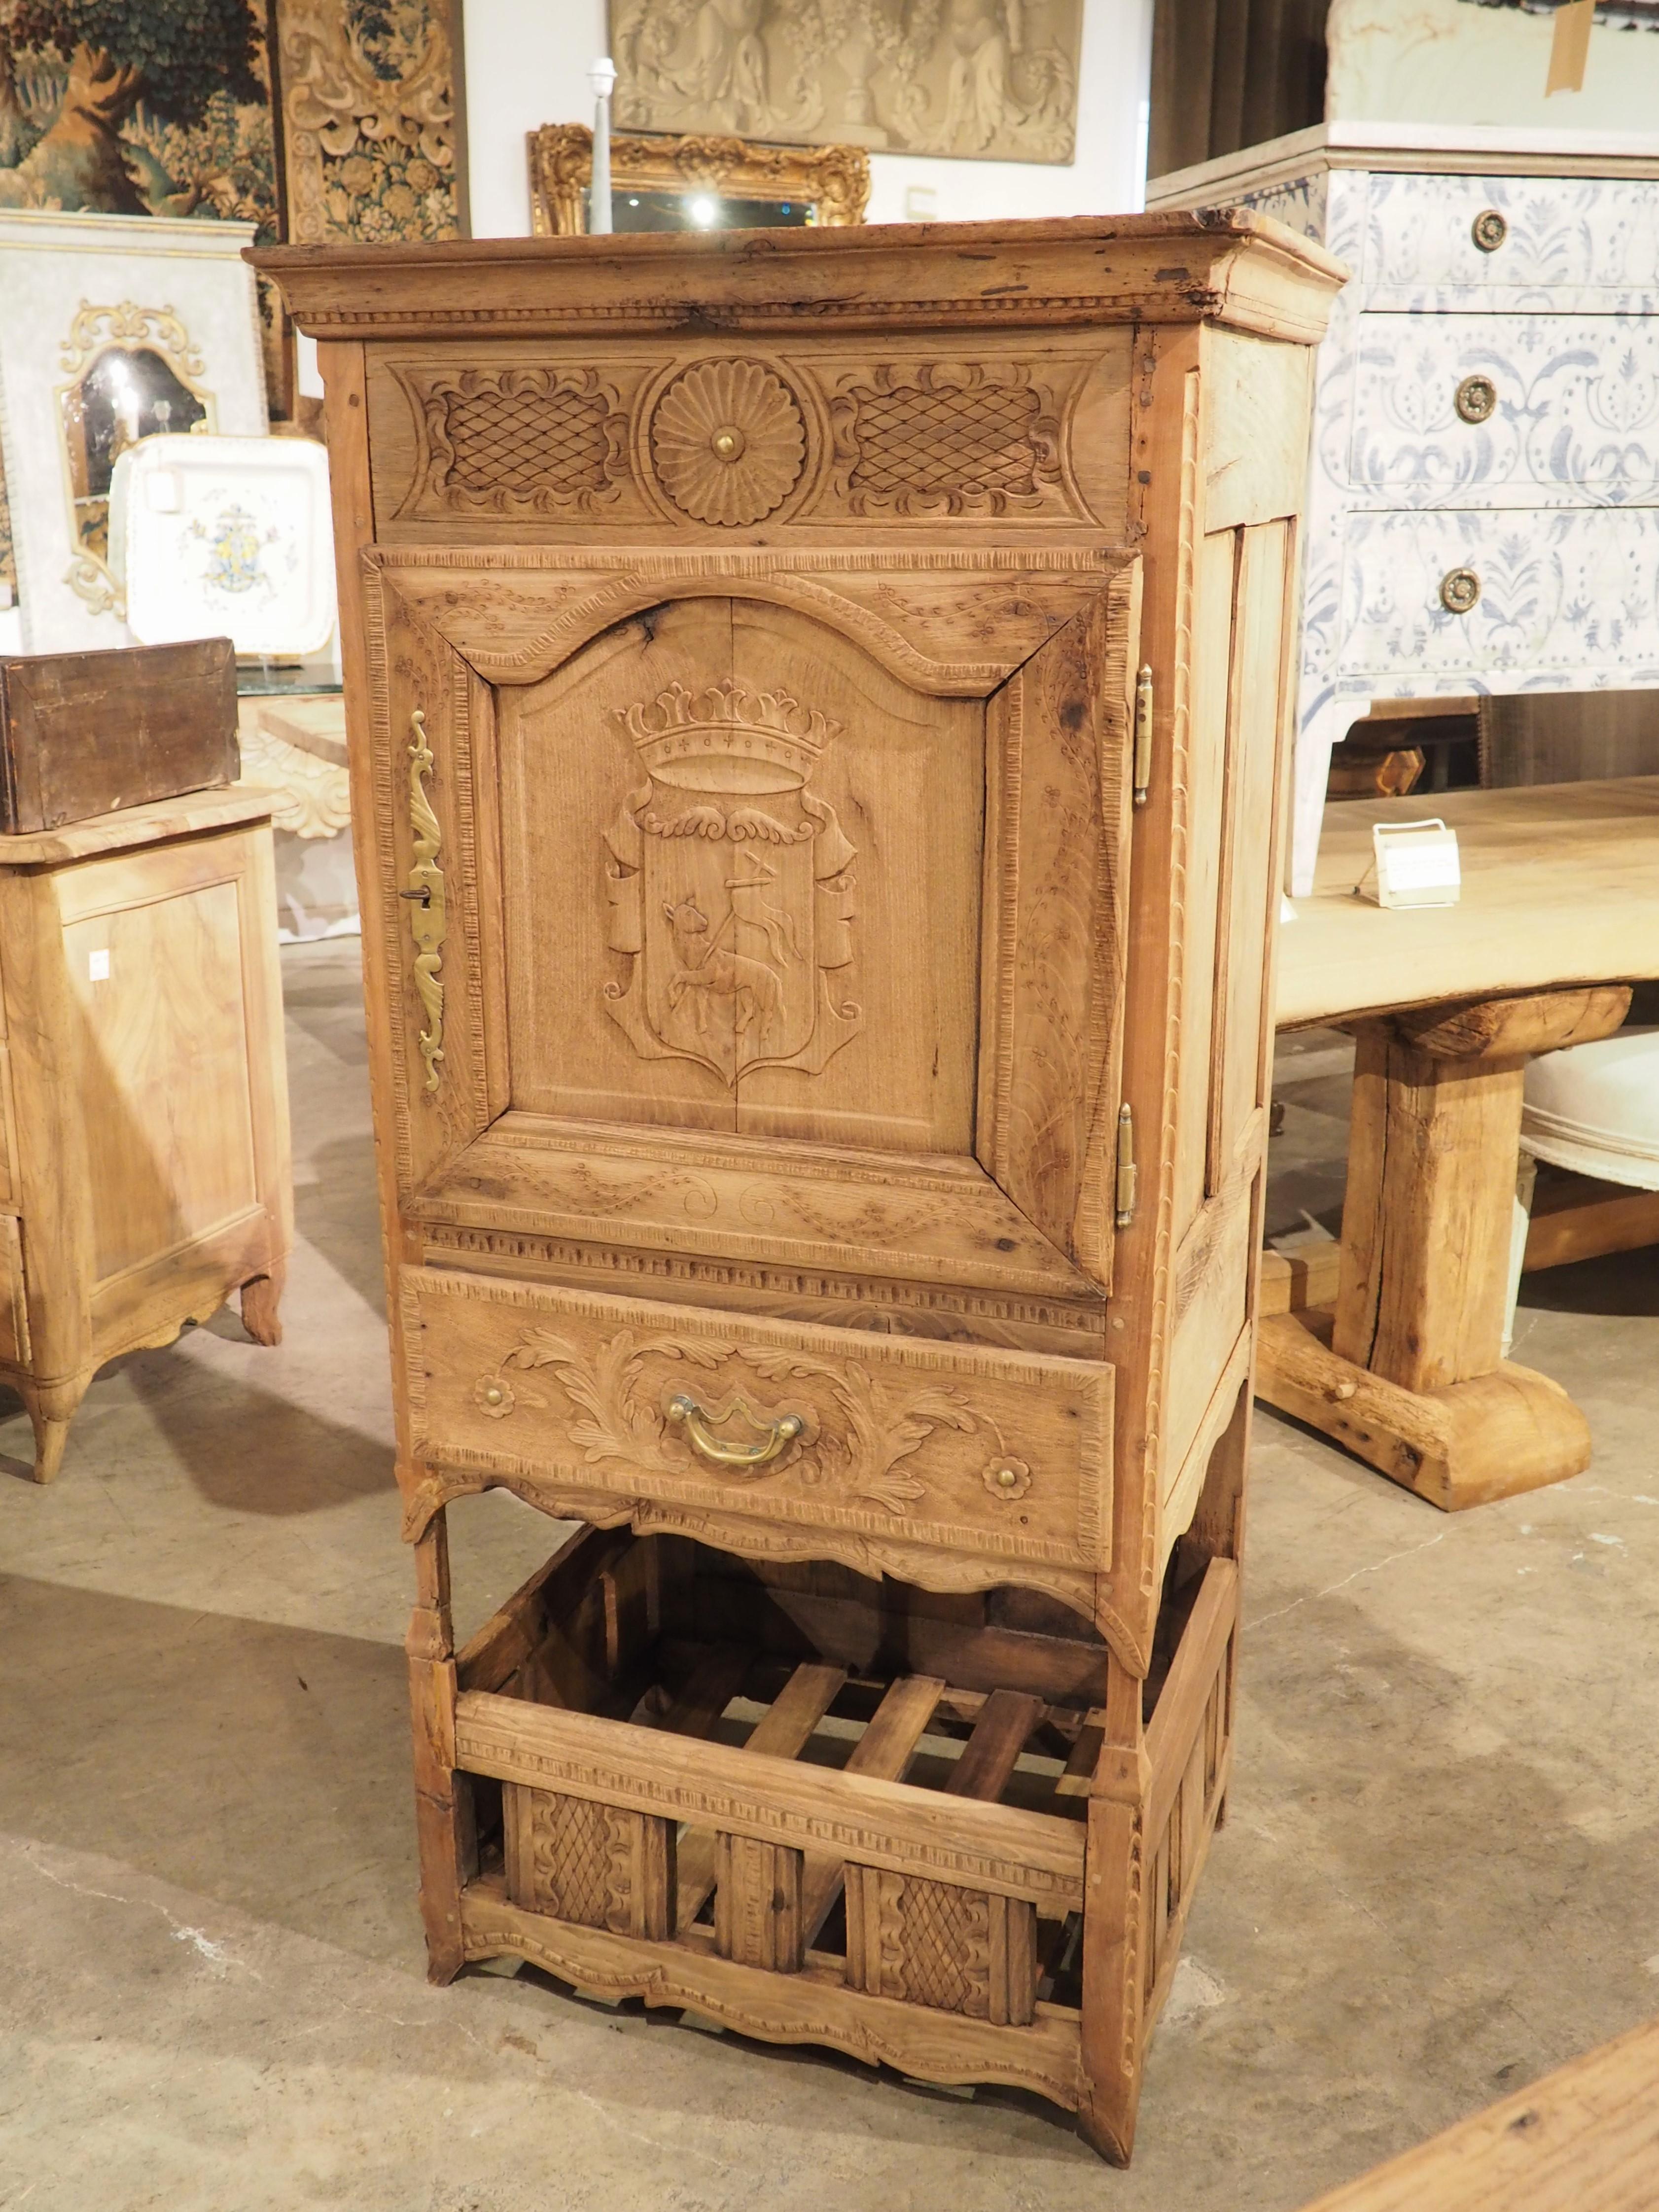 Known as a garde manger, this chestnut food cabinet was hand-carved in the 1800’s in Normandy. Although the term now refers to restaurant prep stations, the French “garde manger” has been the term used for hundreds of years to describe a small